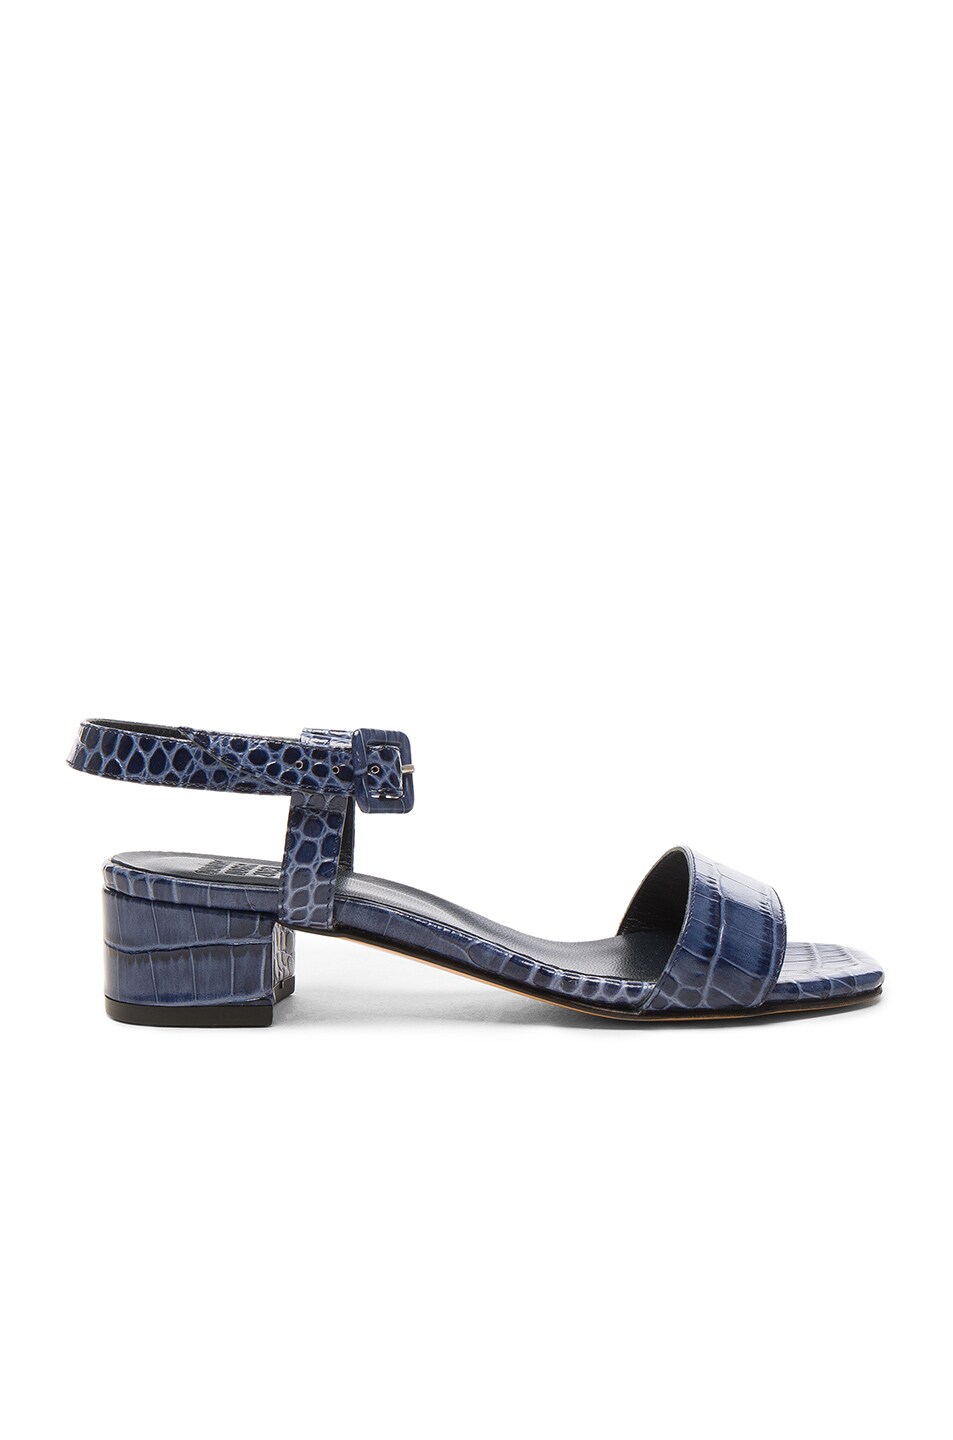 Image 1 of Maryam Nassir Zadeh Embossed Leather Sophie Sandals in Navy Faux Croc